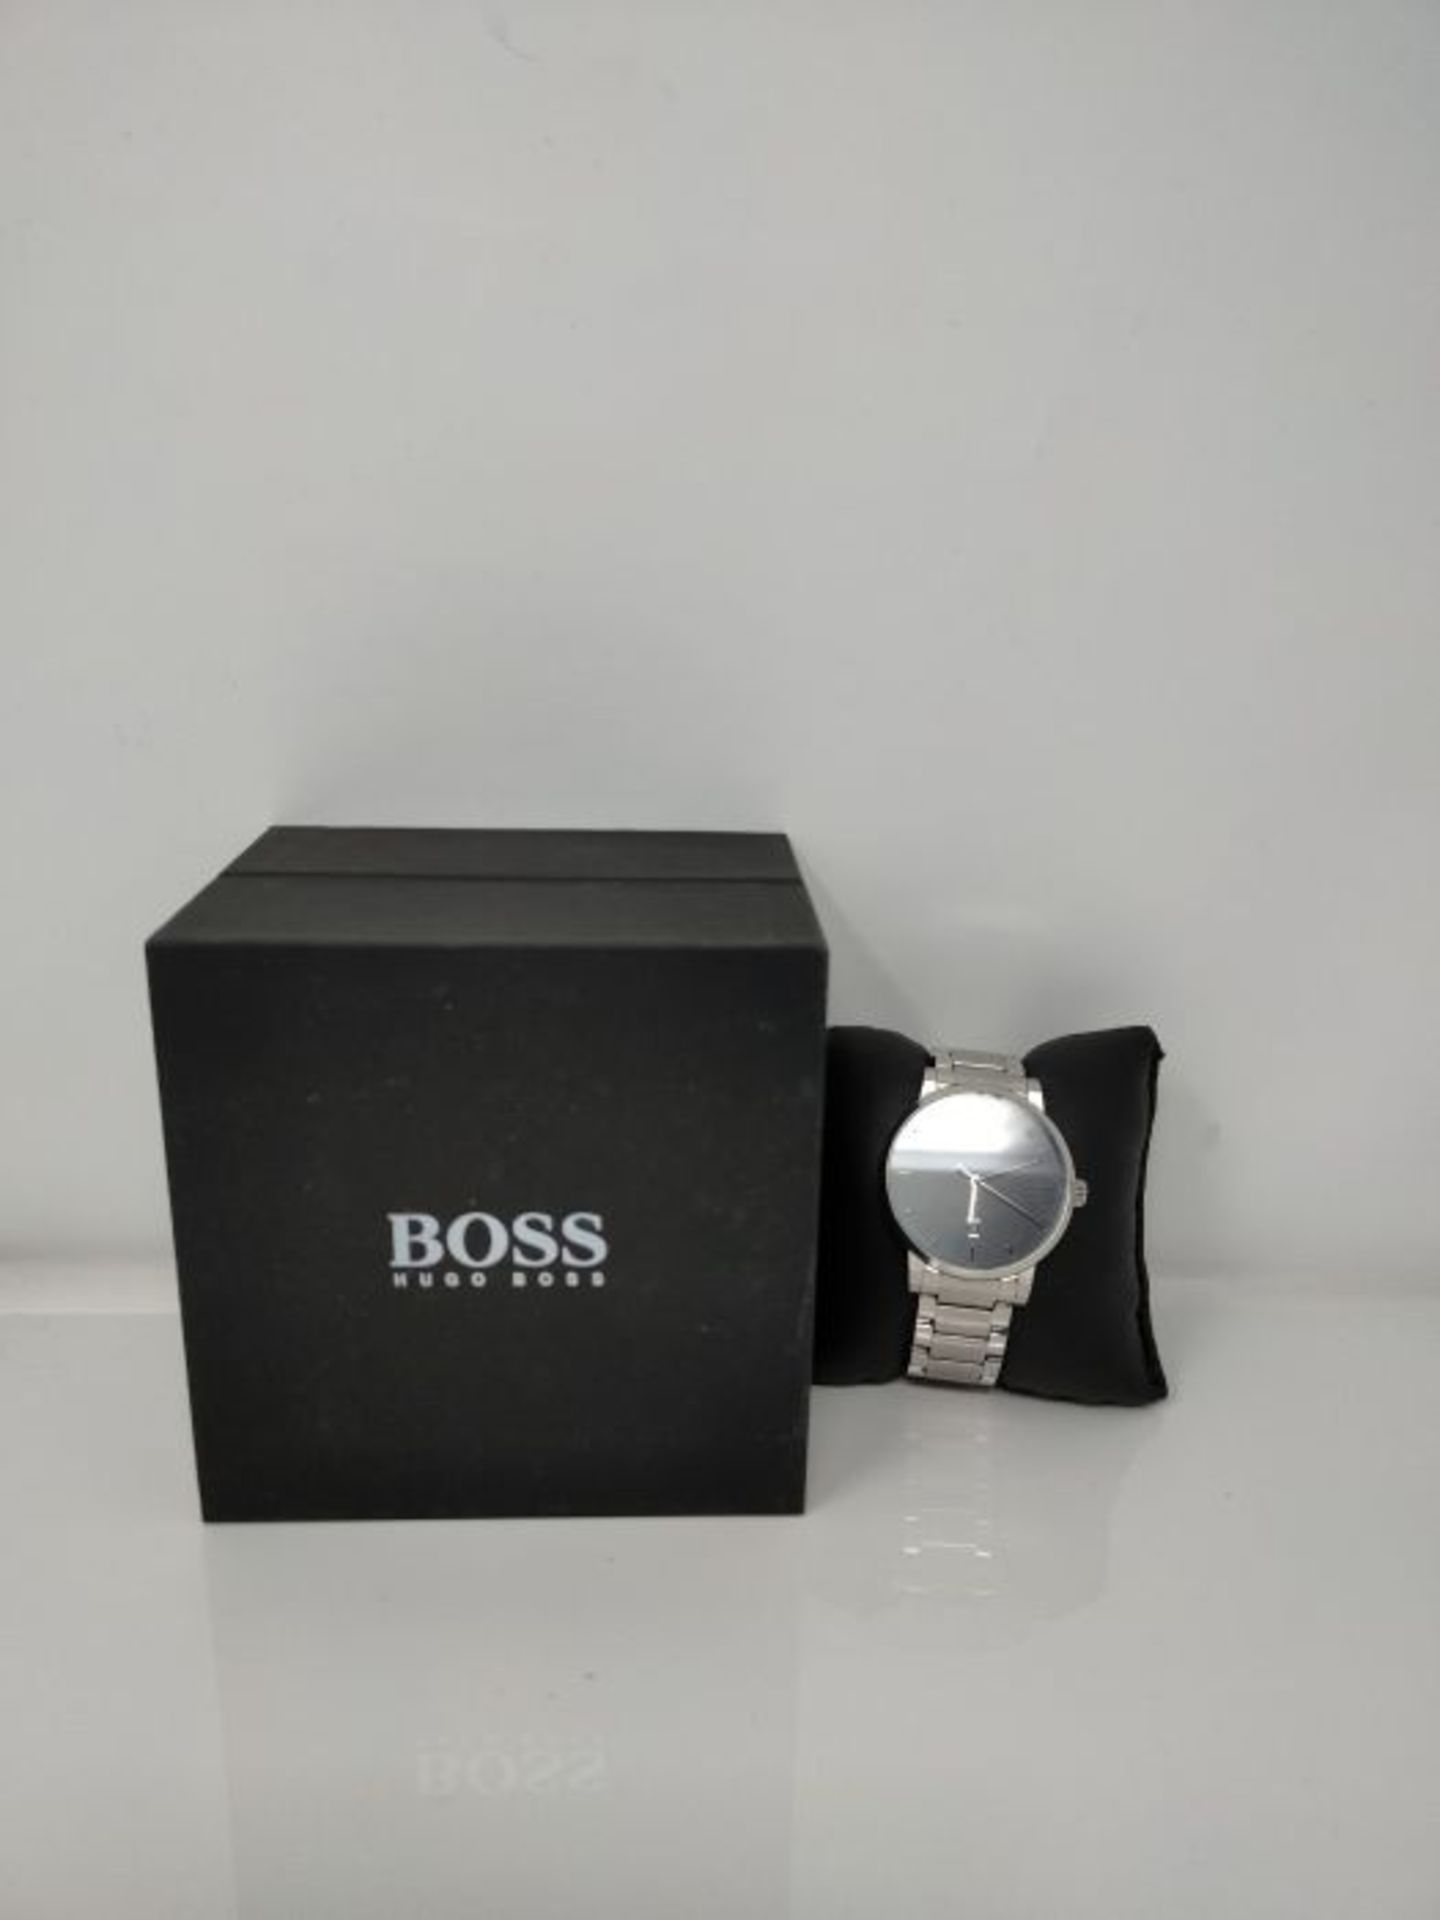 RRP £179.00 BOSS Men's Analogue Quartz Watch with Stainless Steel Strap 1513792, Black, Black - Image 2 of 3